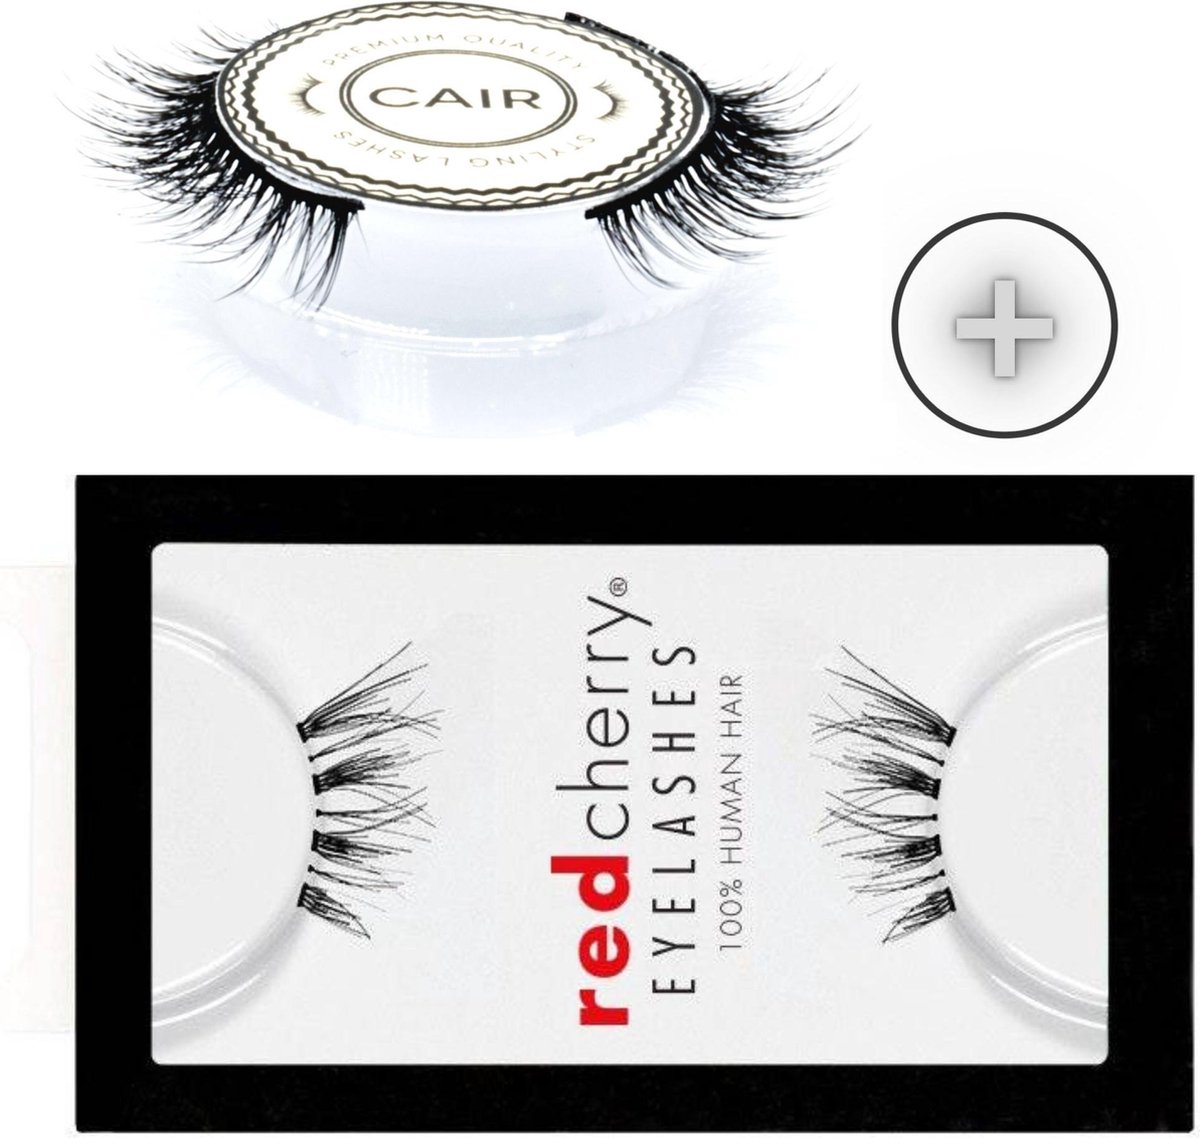 Red Cherry Demi Wispy Accent Lashes & CAIRSTYLING CS#207 - Premium Professional Styling Lashes - Set of 2 - Wimperverlenging - Synthetische Kunstwimpers - False Lashes Cruelty Free / Vegan